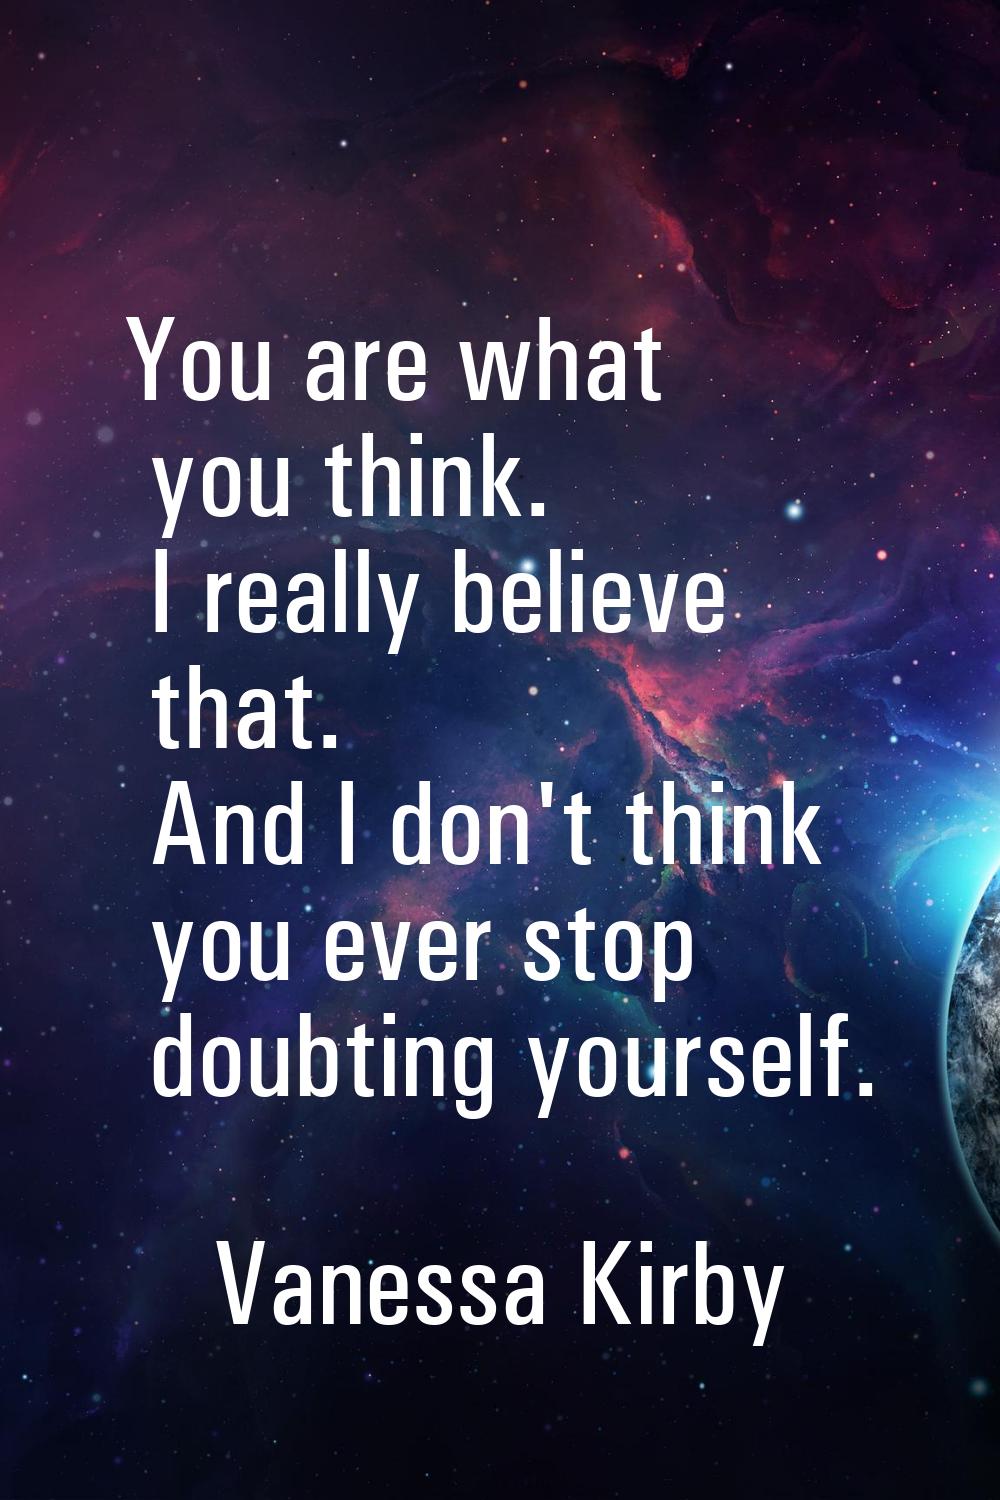 You are what you think. I really believe that. And I don't think you ever stop doubting yourself.